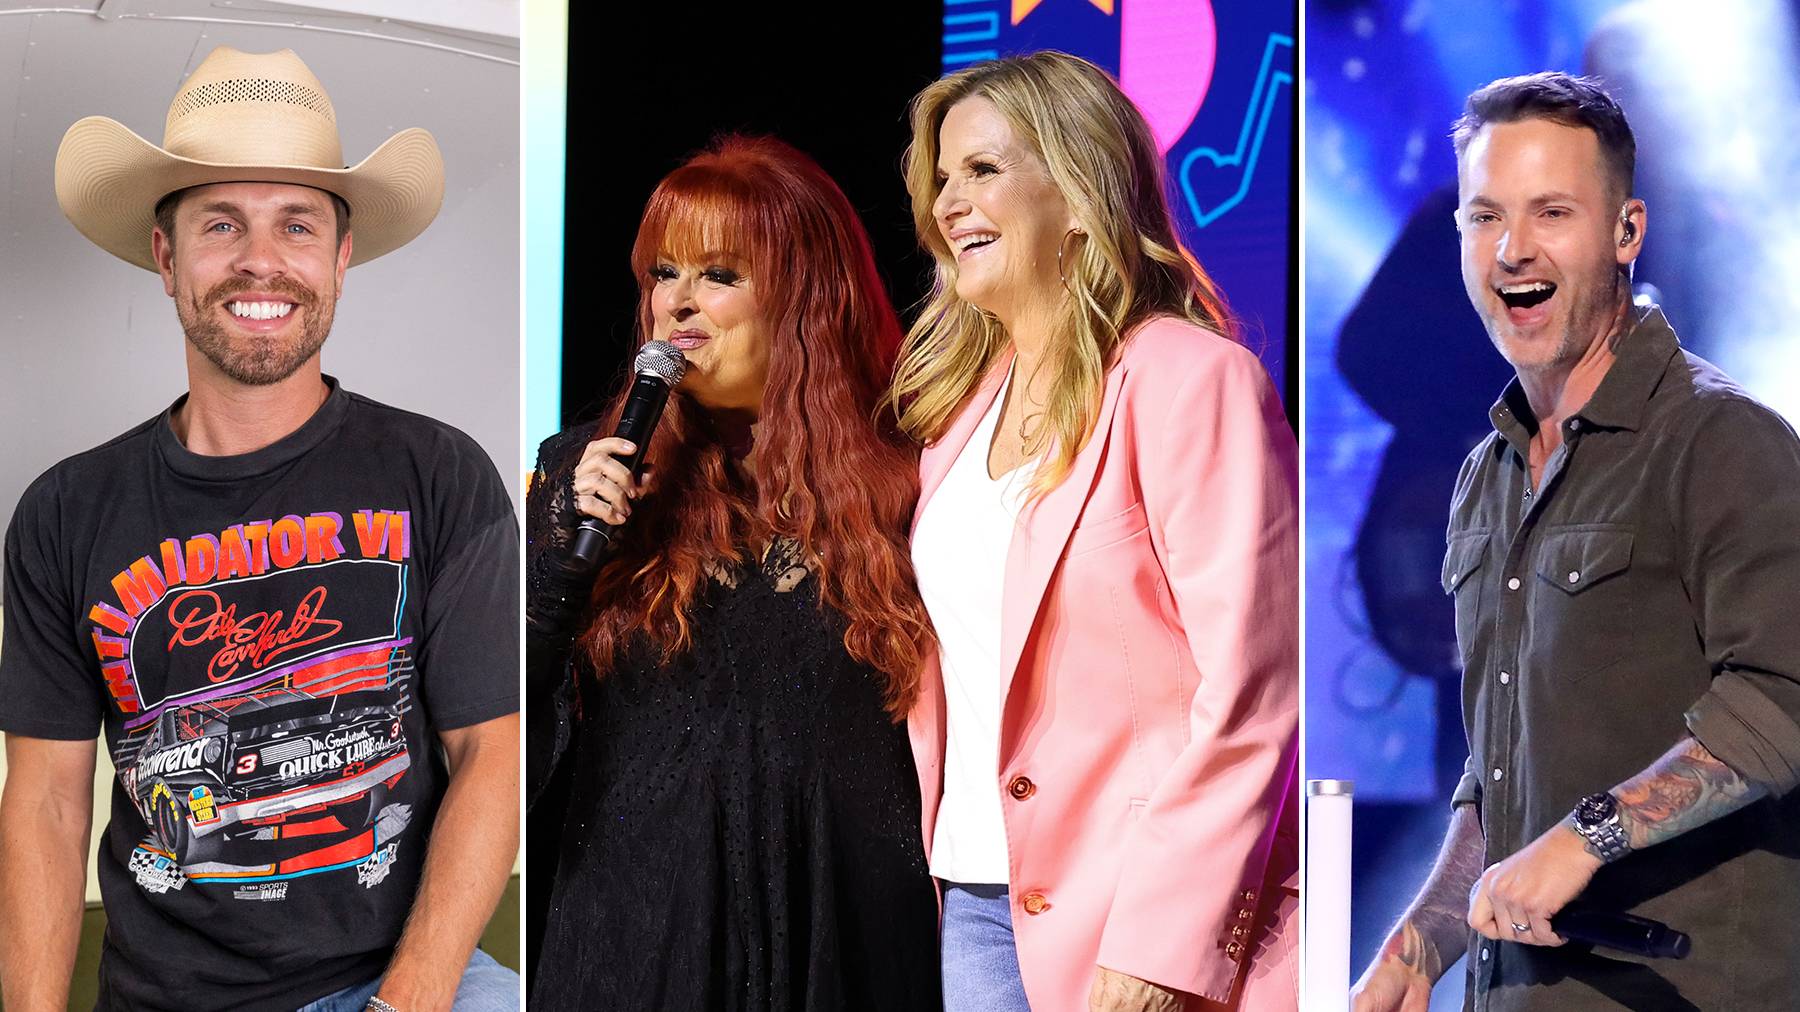 CMT Roundup: New Music From Dustin Lynch, Wynonna with Trisha